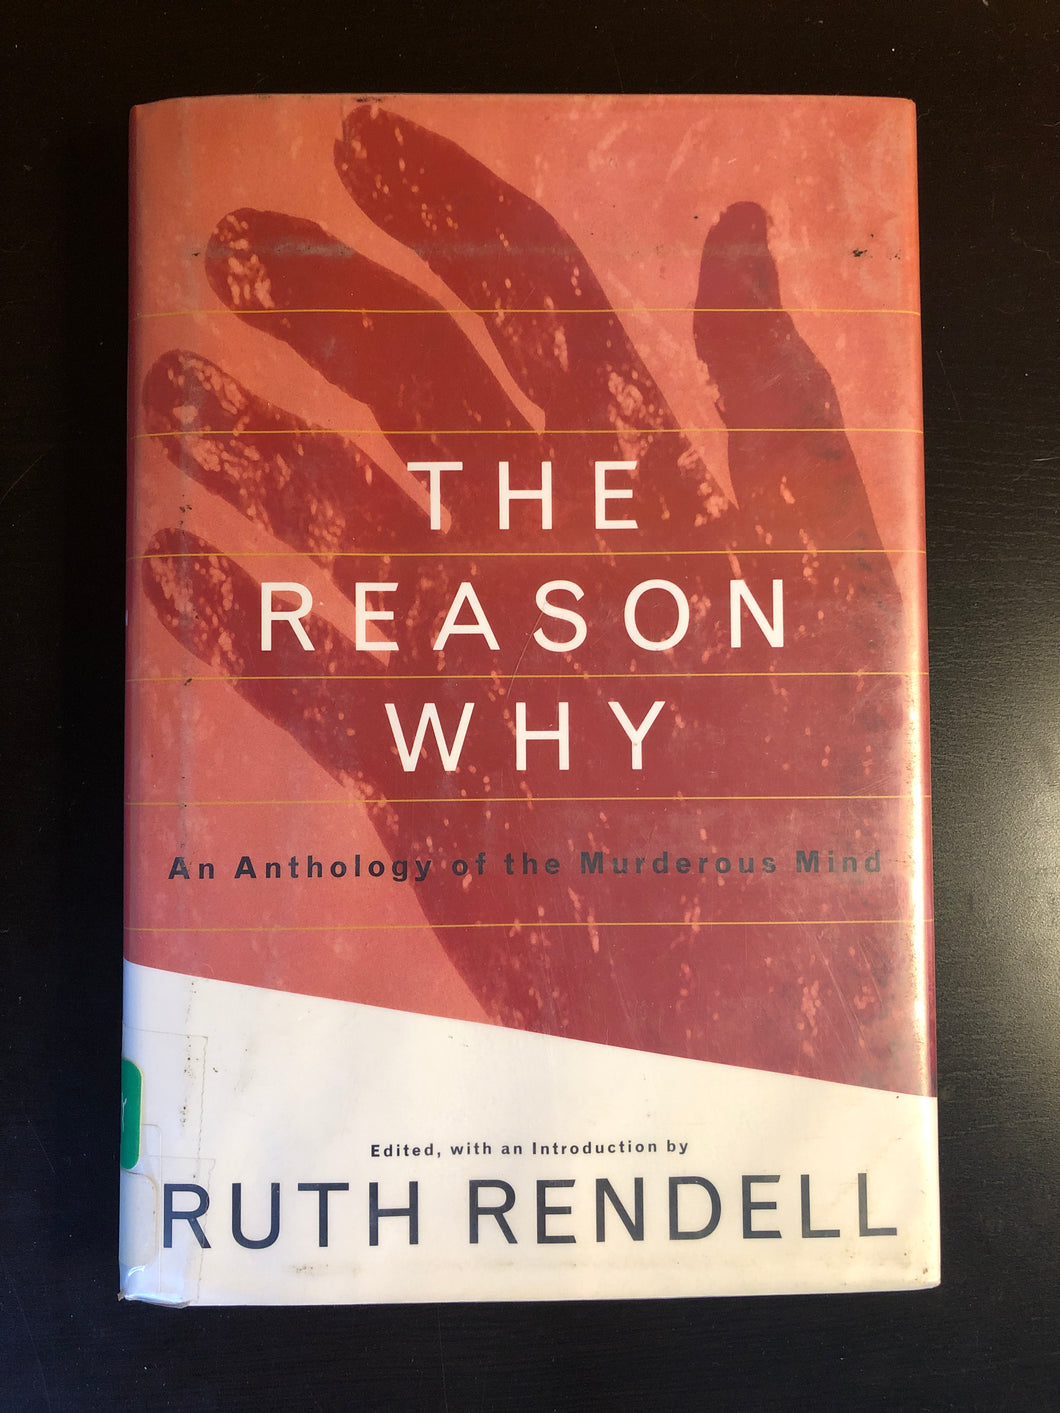 The Reason Why: An Anthology of the Murderous Mind